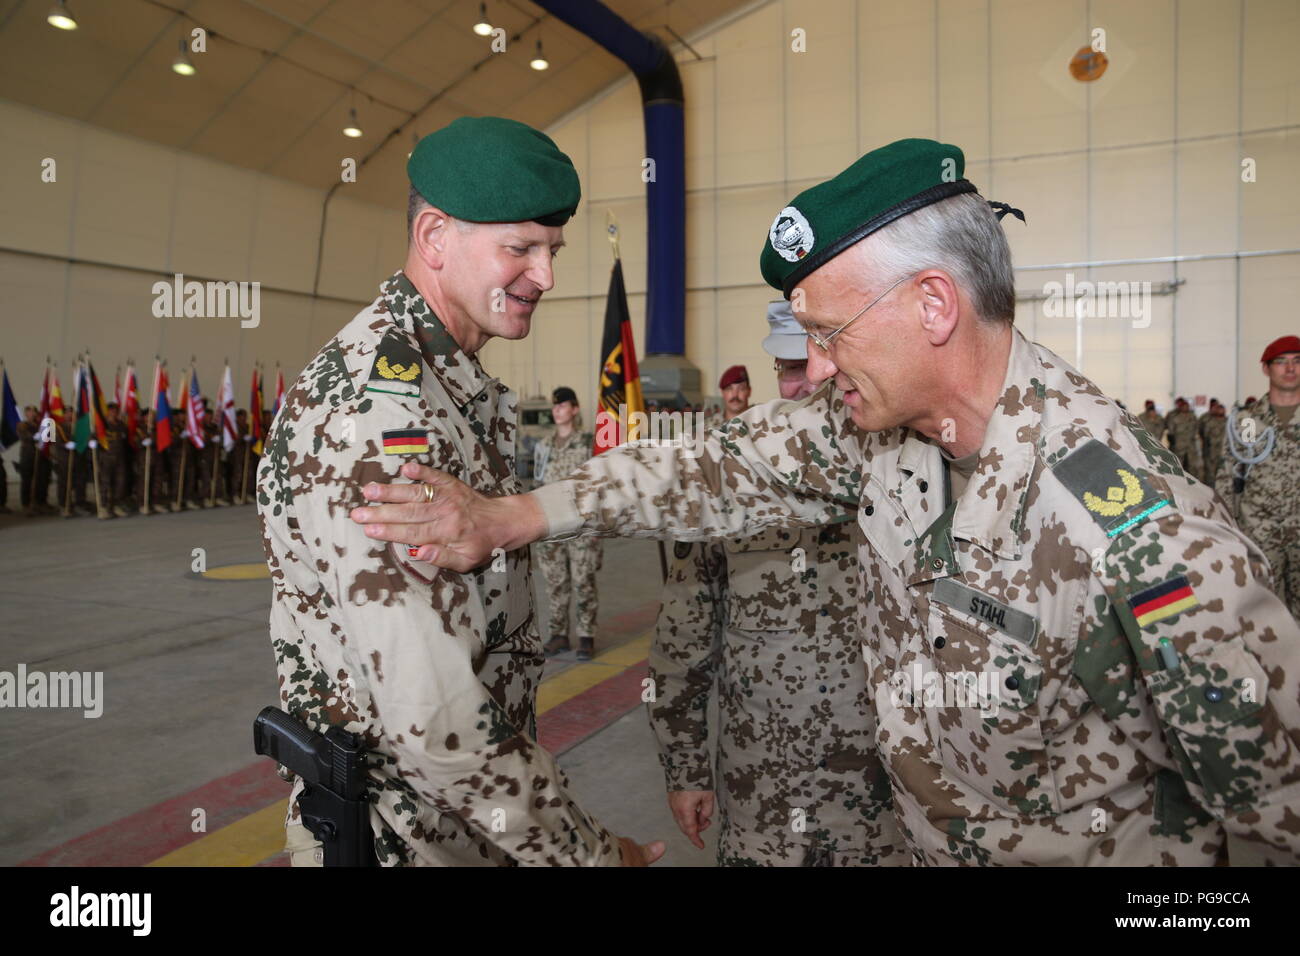 German Army Brig. Gen. Wolf-Jürgen Stahl (right), hands over the symbolic badge “commander TAAC-North” to his successor, German Army Brig. Gen. Ernst-Peter Klaffus, on August 21, 2018 at TAAC-North in Mazer-e Sharif, Afghanistan. Stahl took command of TAAC-North in October 2017. Stock Photo